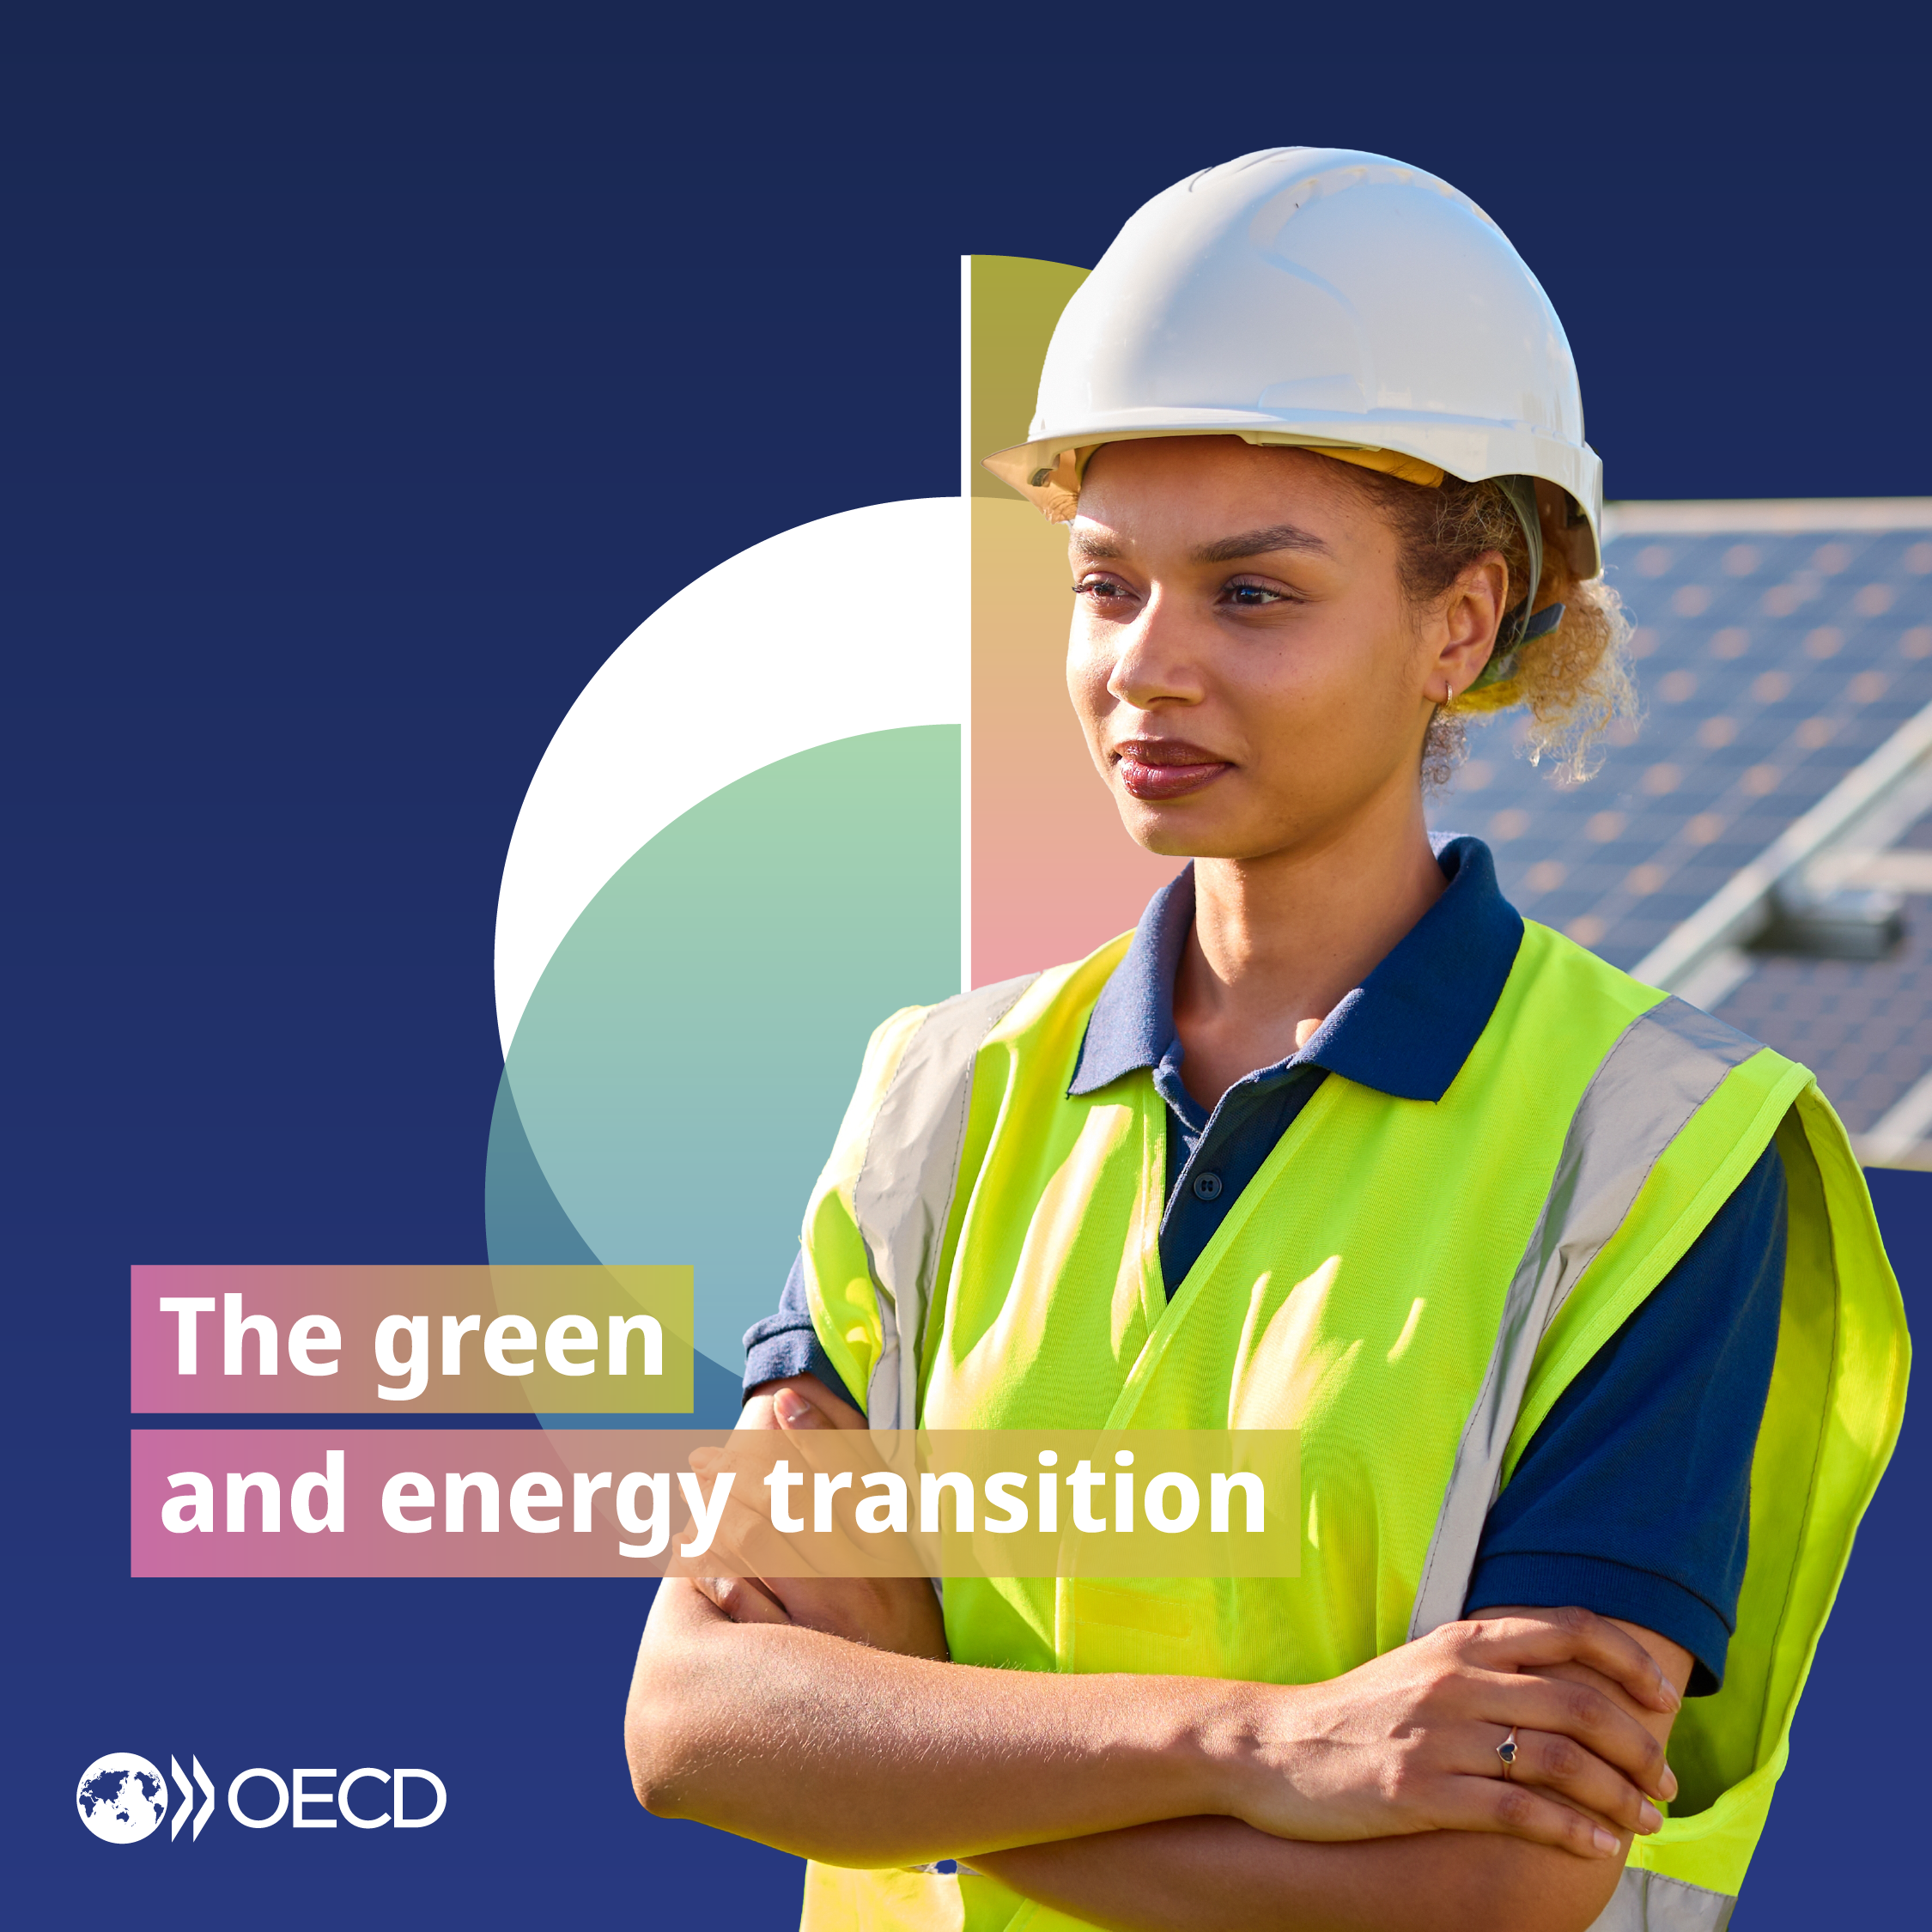 Image on the green and energy transition